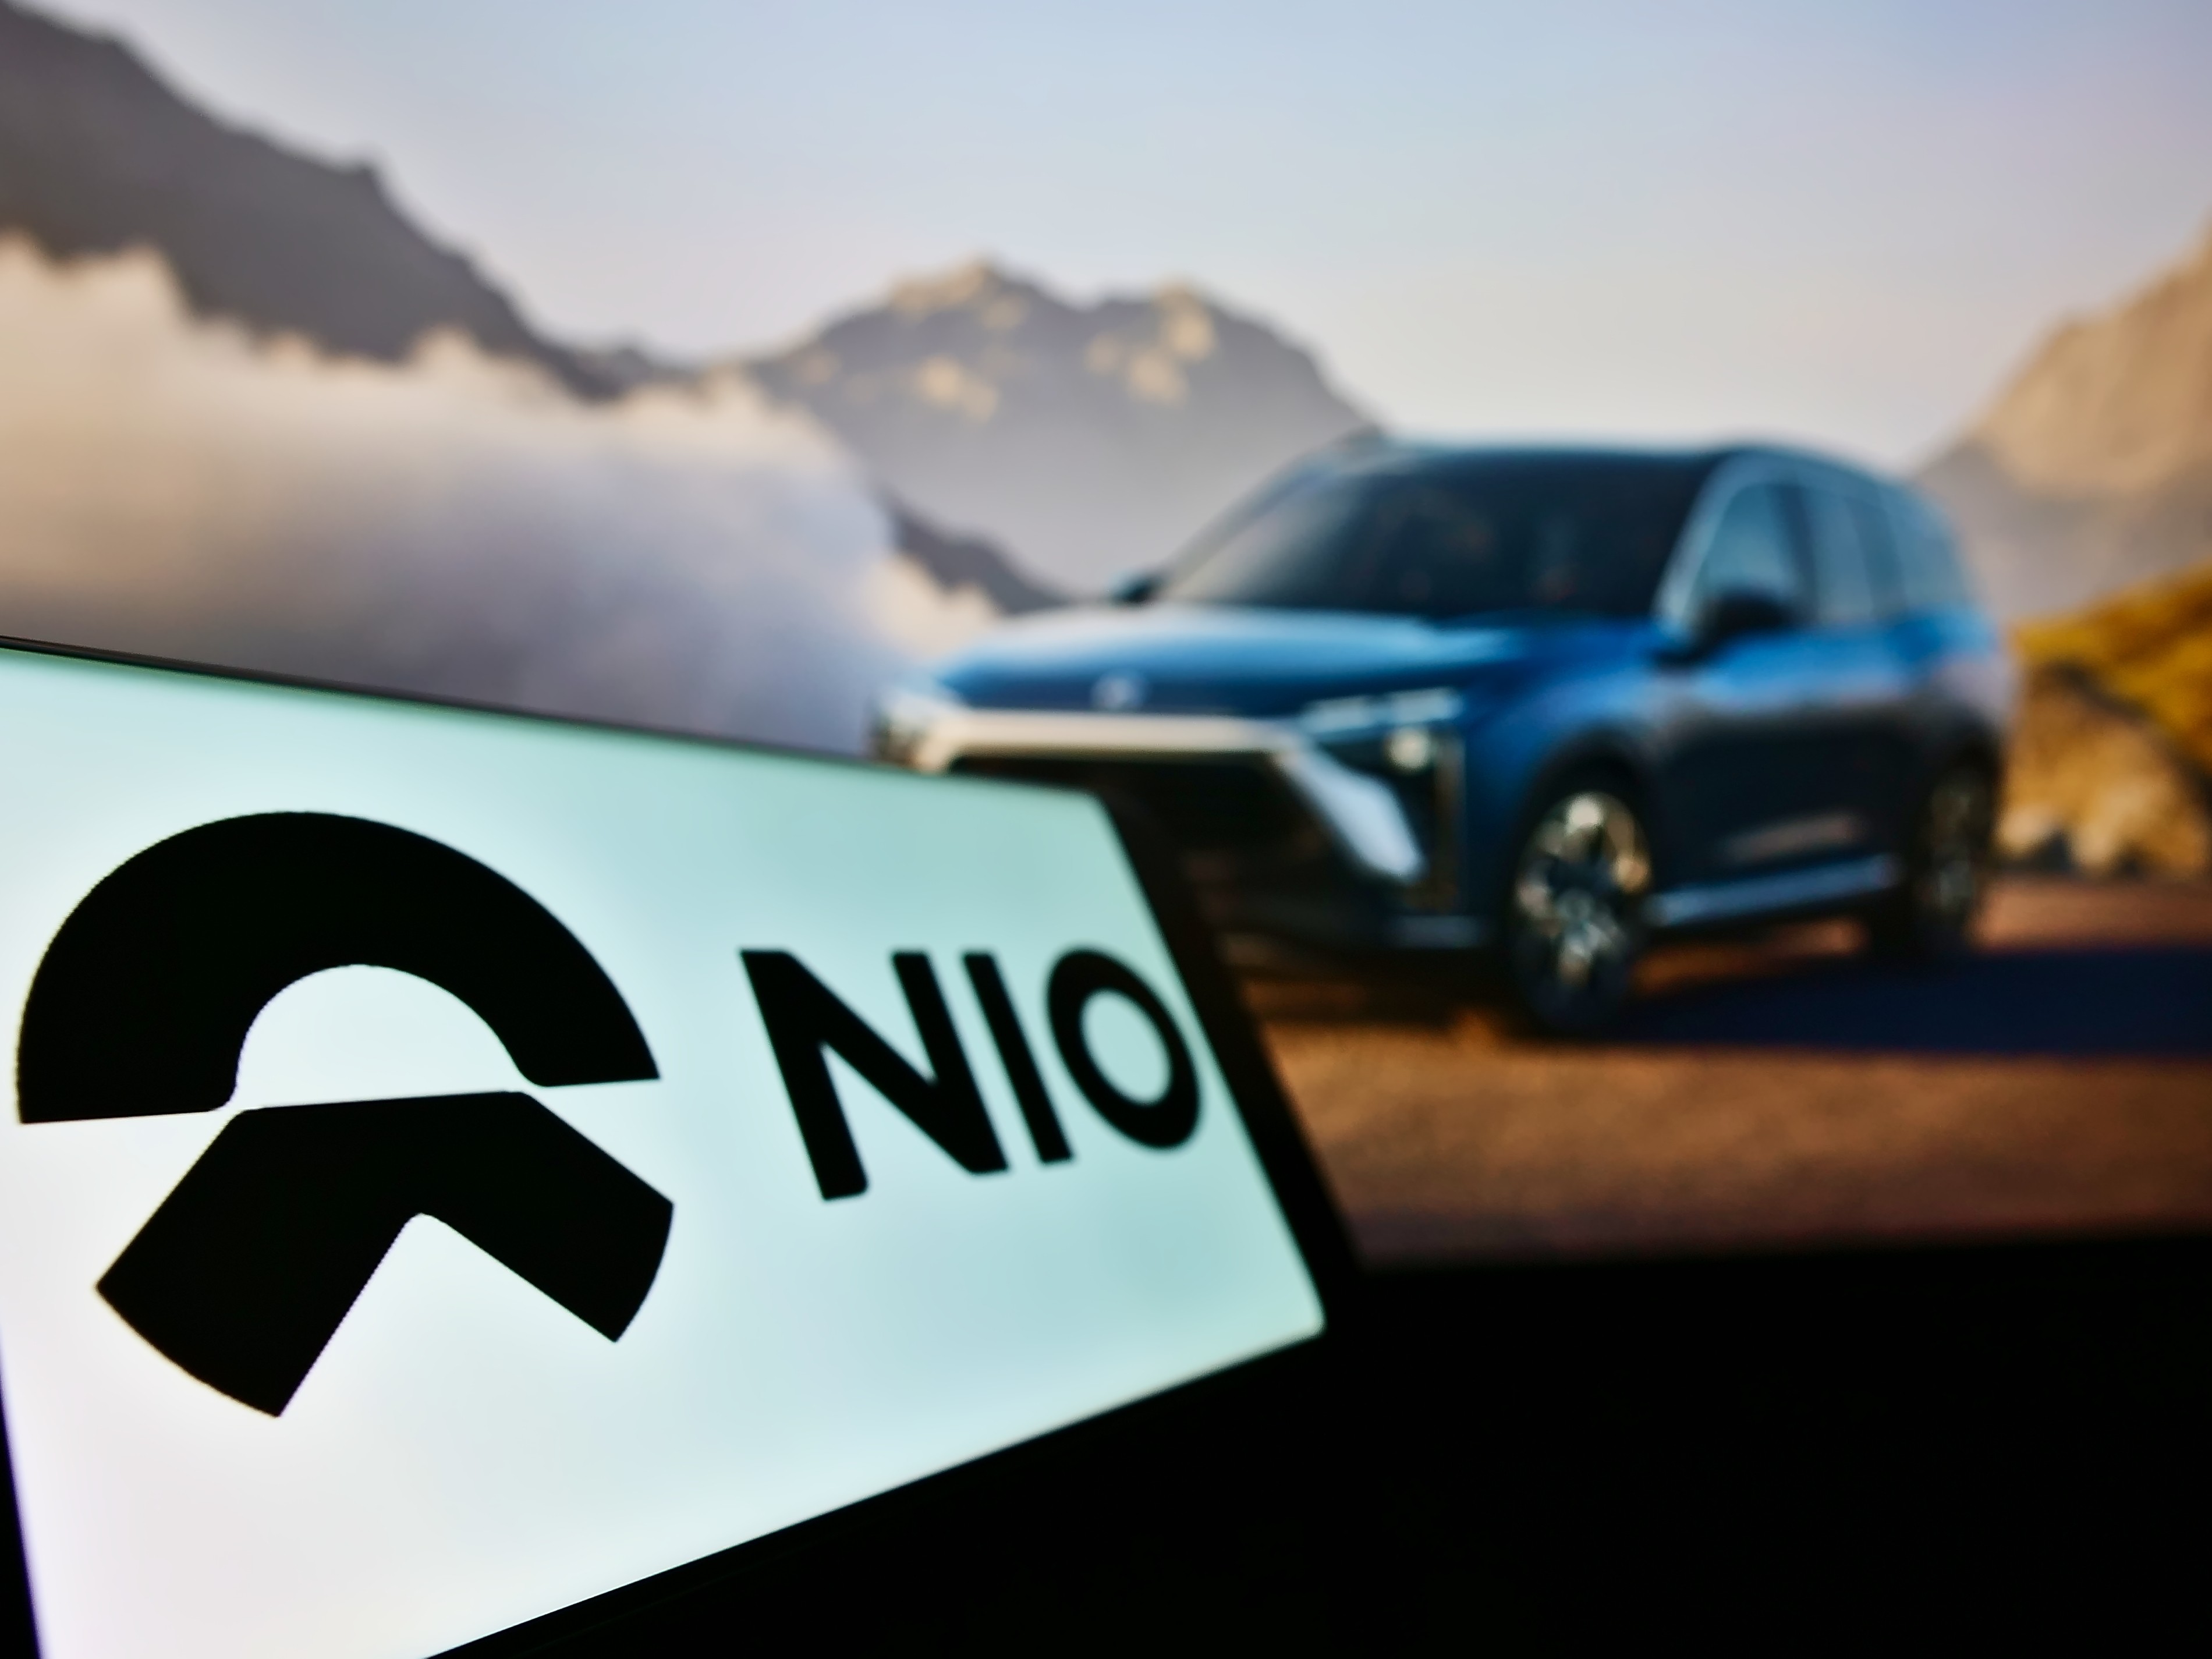 Chinese electric carmaker Nio plans to cut spending on projects that are not expected to help boost its financial performance over the next three years, while consolidating duplicate departments and roles to streamline its organisation. Photo: Shutterstock